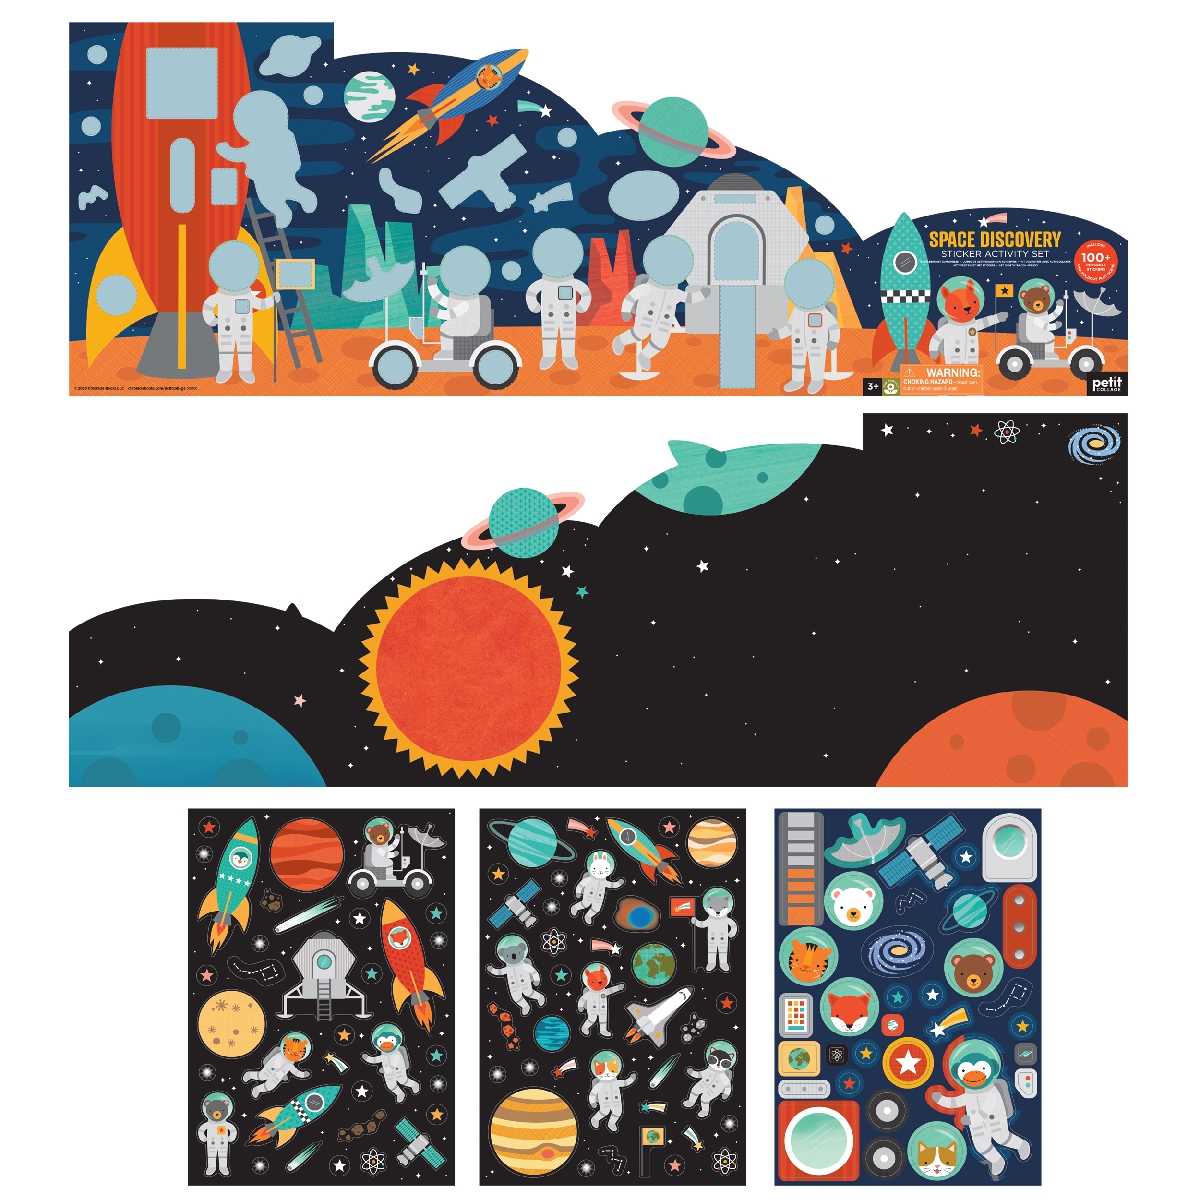 Sticker Activity Set: Space Discovery